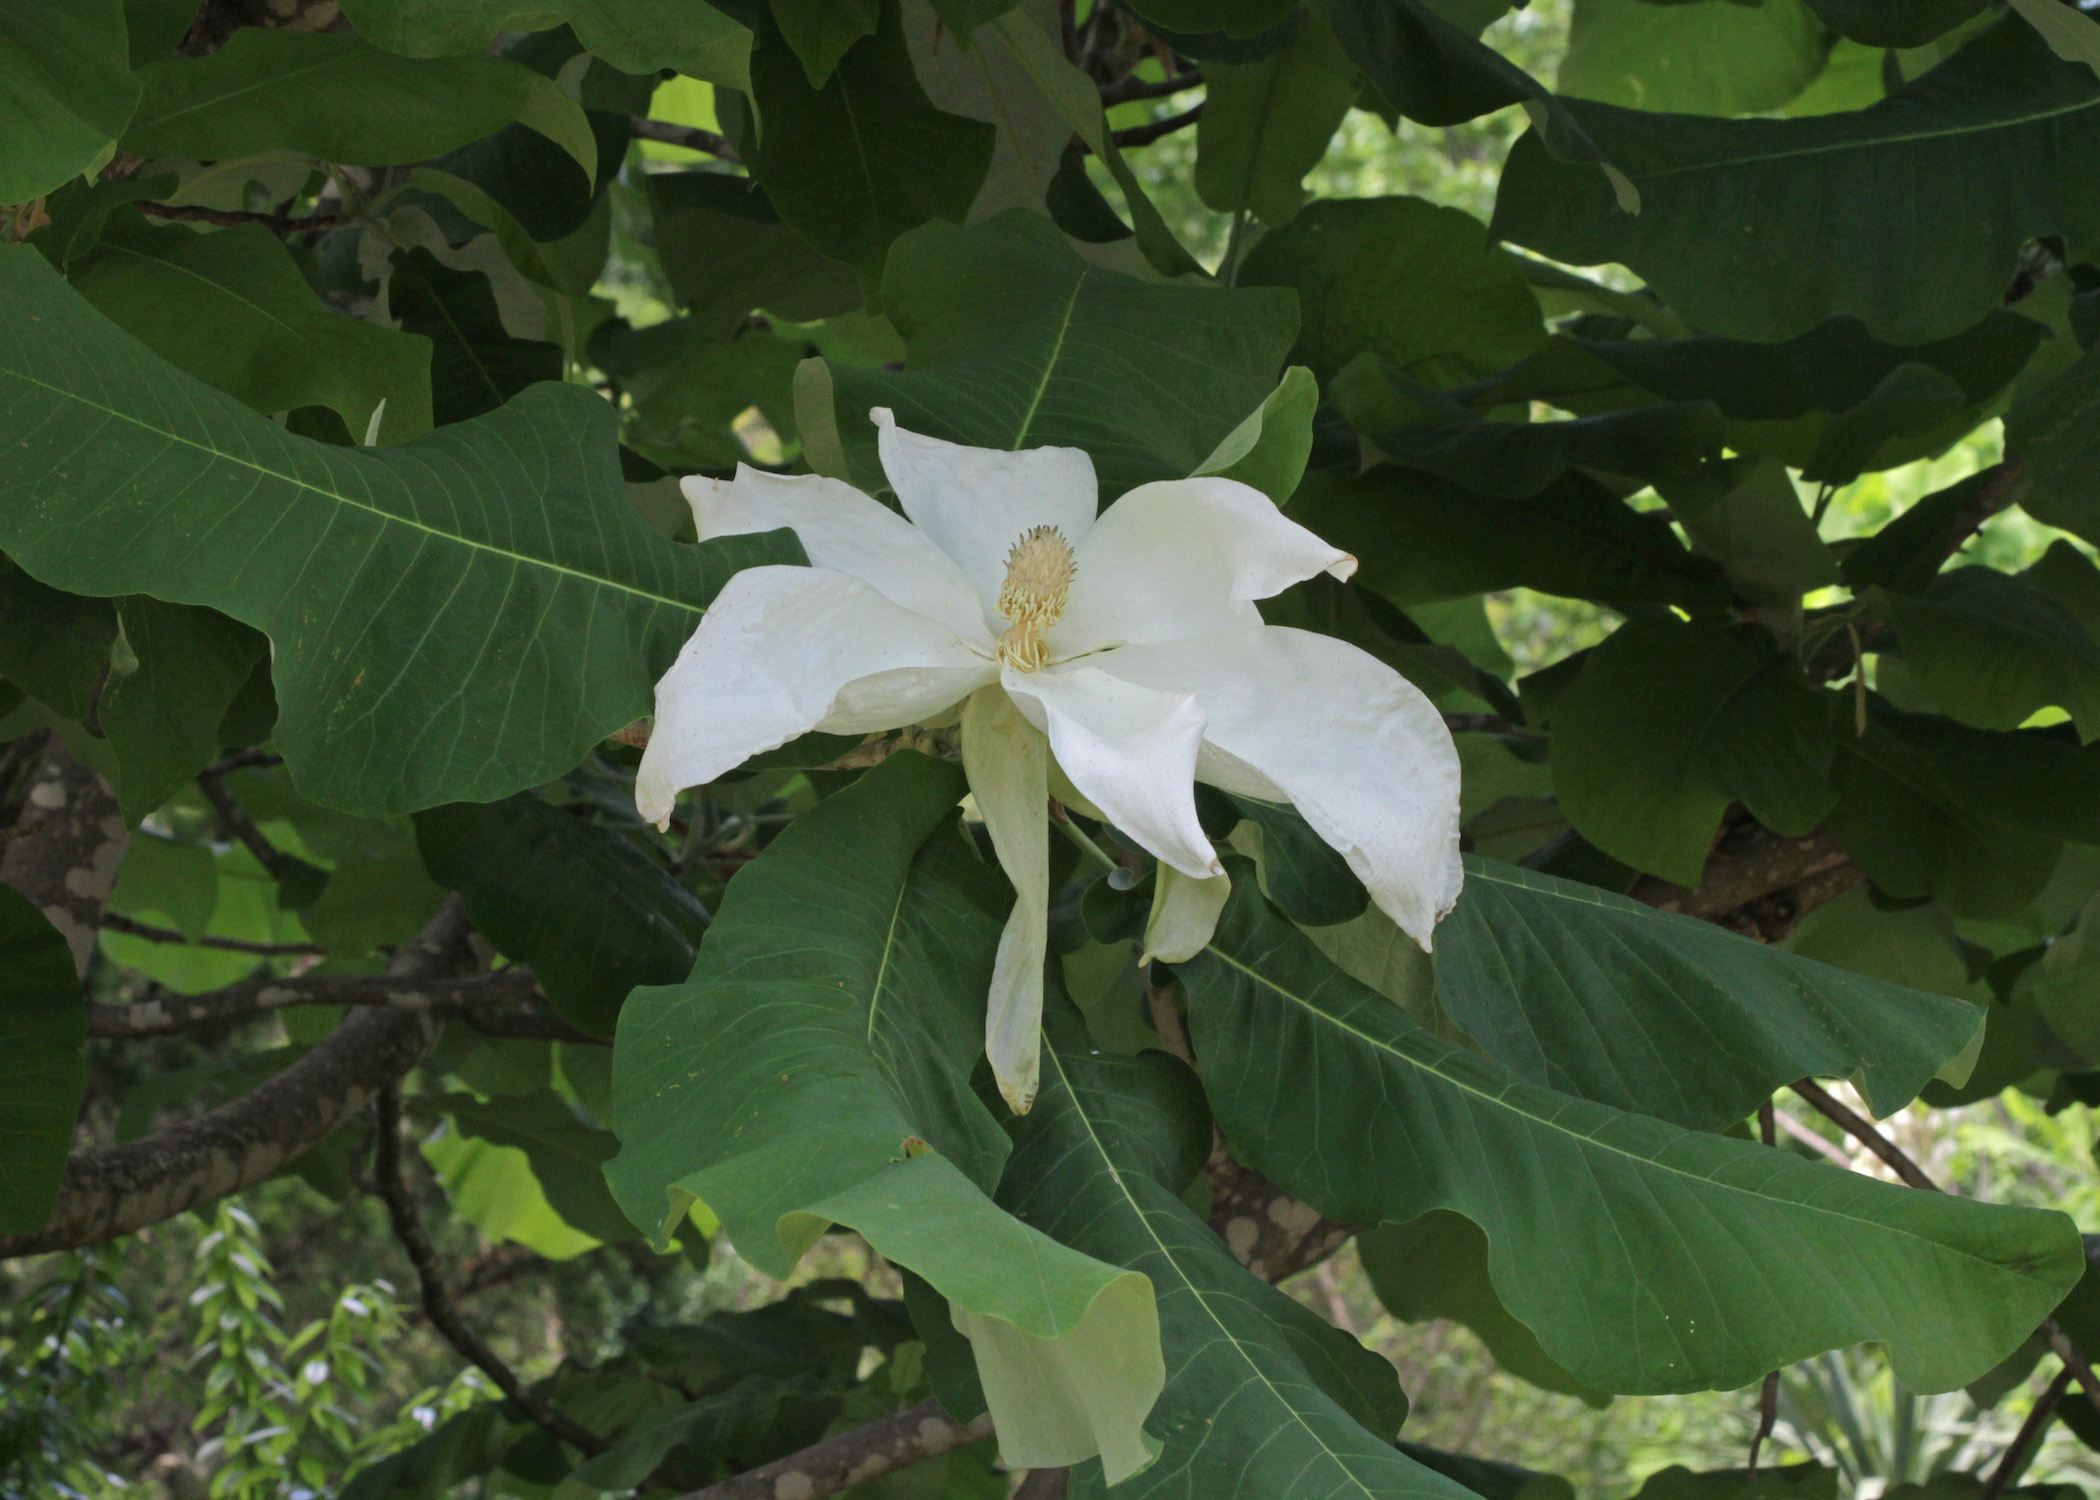 The Scientific Name is Magnolia macrophylla. You will likely hear them called Big Leaf Magnolia, Large-leaved Cucumber Tree . This picture shows the Large blooms with spreading petals of Magnolia macrophylla